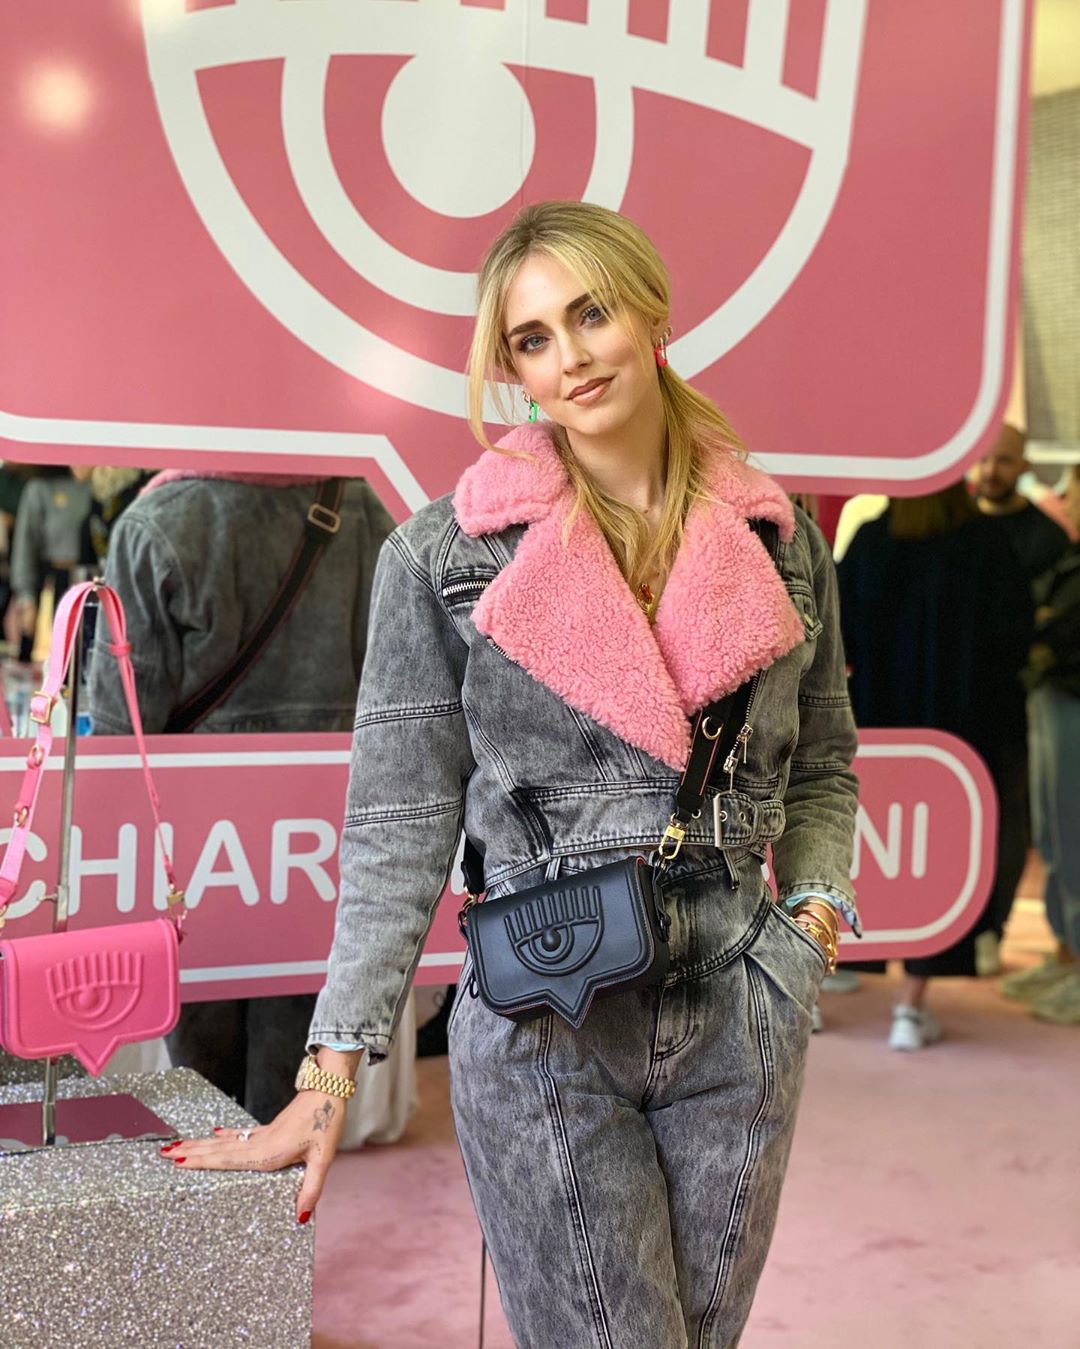 Chiara Ferragni Collection Launches The Eyelike Bag - The Blonde Salad